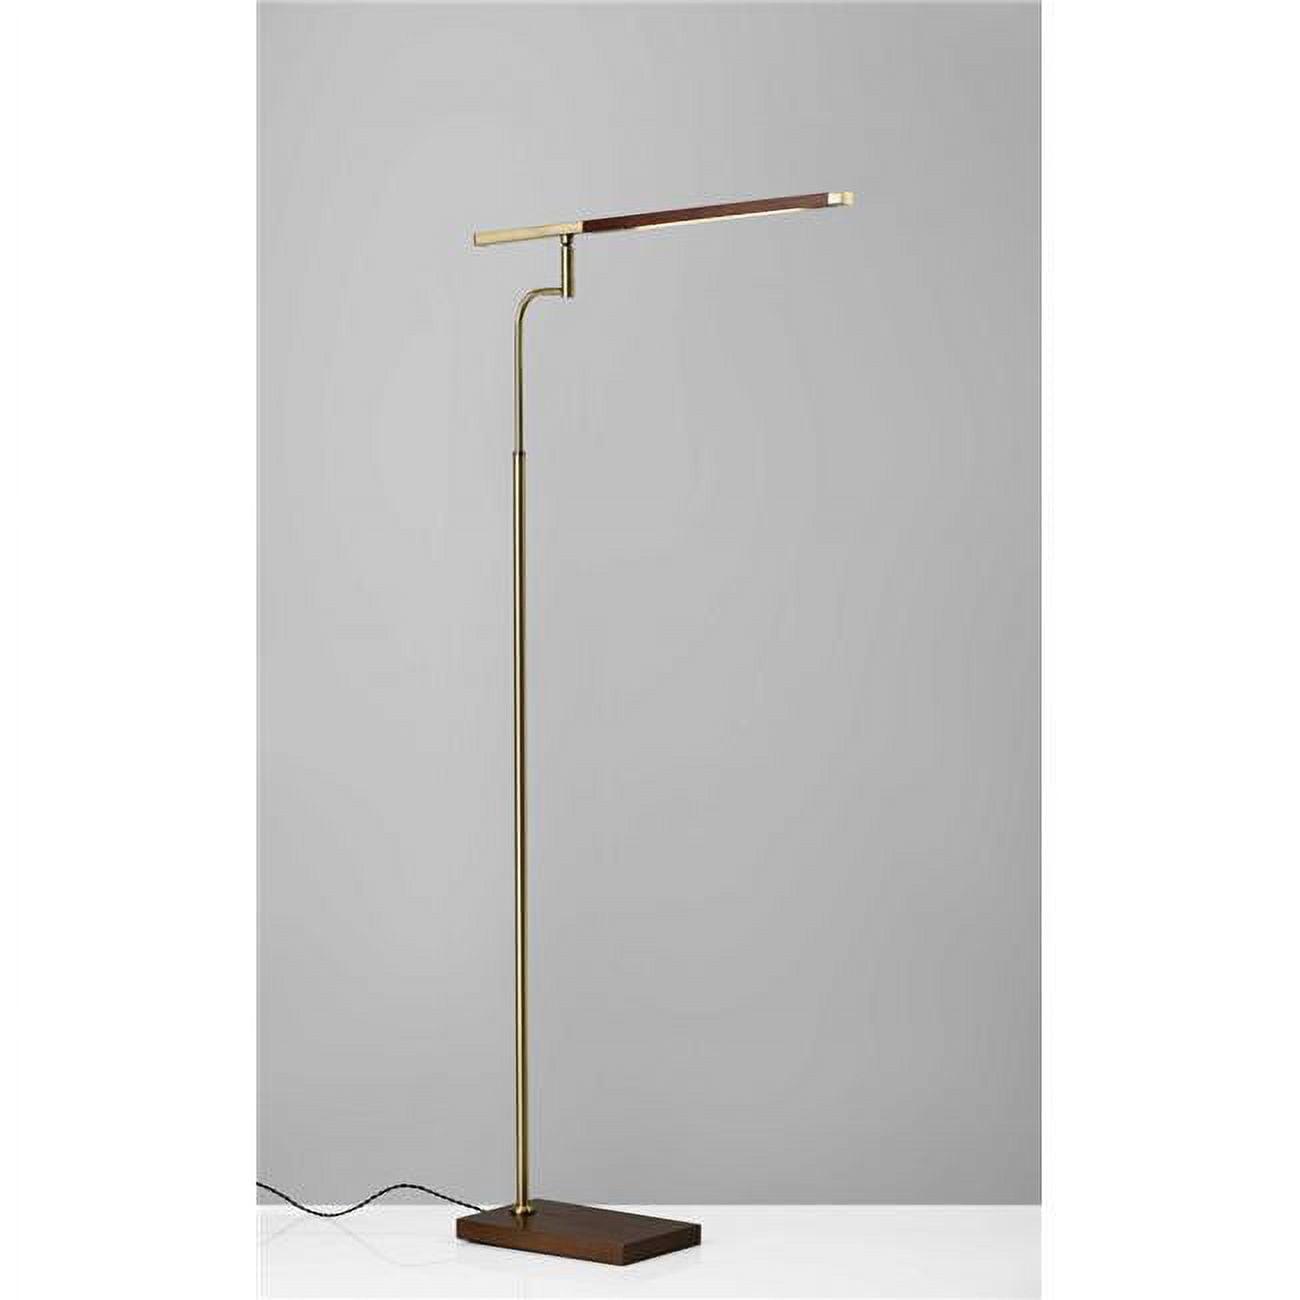 Adjustable Black Walnut Wood LED Floor Lamp with 3-Way Touch Switch